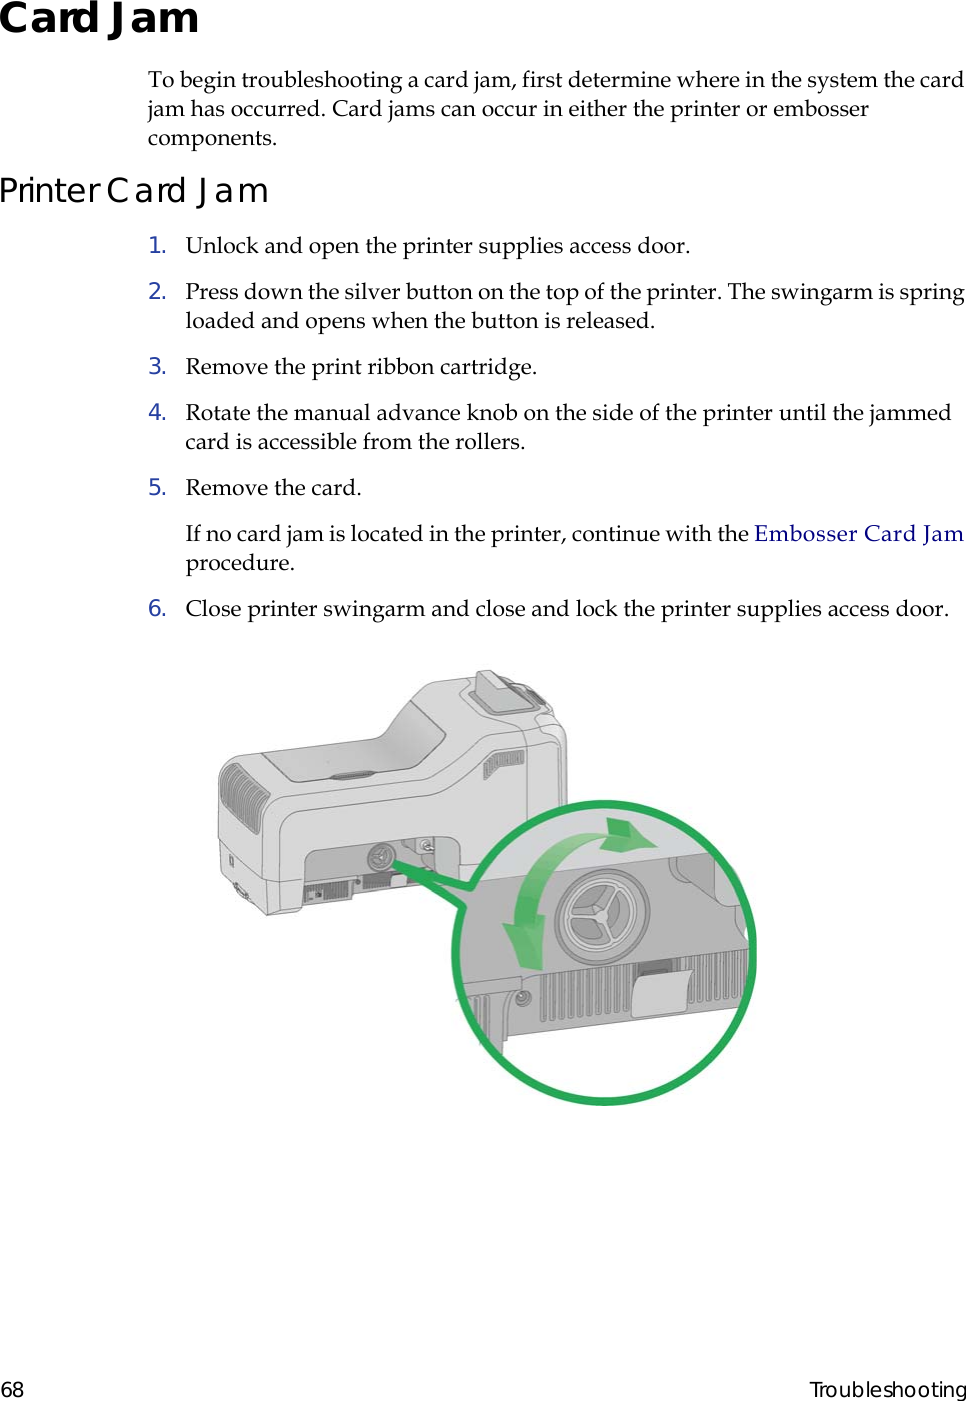  68 TroubleshootingCard JamTo begin troubleshooting a card jam, first determine where in the system the card jam has occurred. Card jams can occur in either the printer or embosser components.Printer Card Jam1.  Unlock and open the printer supplies access door.2.  Press down the silver button on the top of the printer. The swingarm is spring loaded and opens when the button is released.3.  Remove the print ribbon cartridge.4.  Rotate the manual advance knob on the side of the printer until the jammed card is accessible from the rollers.5.  Remove the card.If no card jam is located in the printer, continue with the Embosser Card Jam procedure.6.  Close printer swingarm and close and lock the printer supplies access door.                                                                                                                  